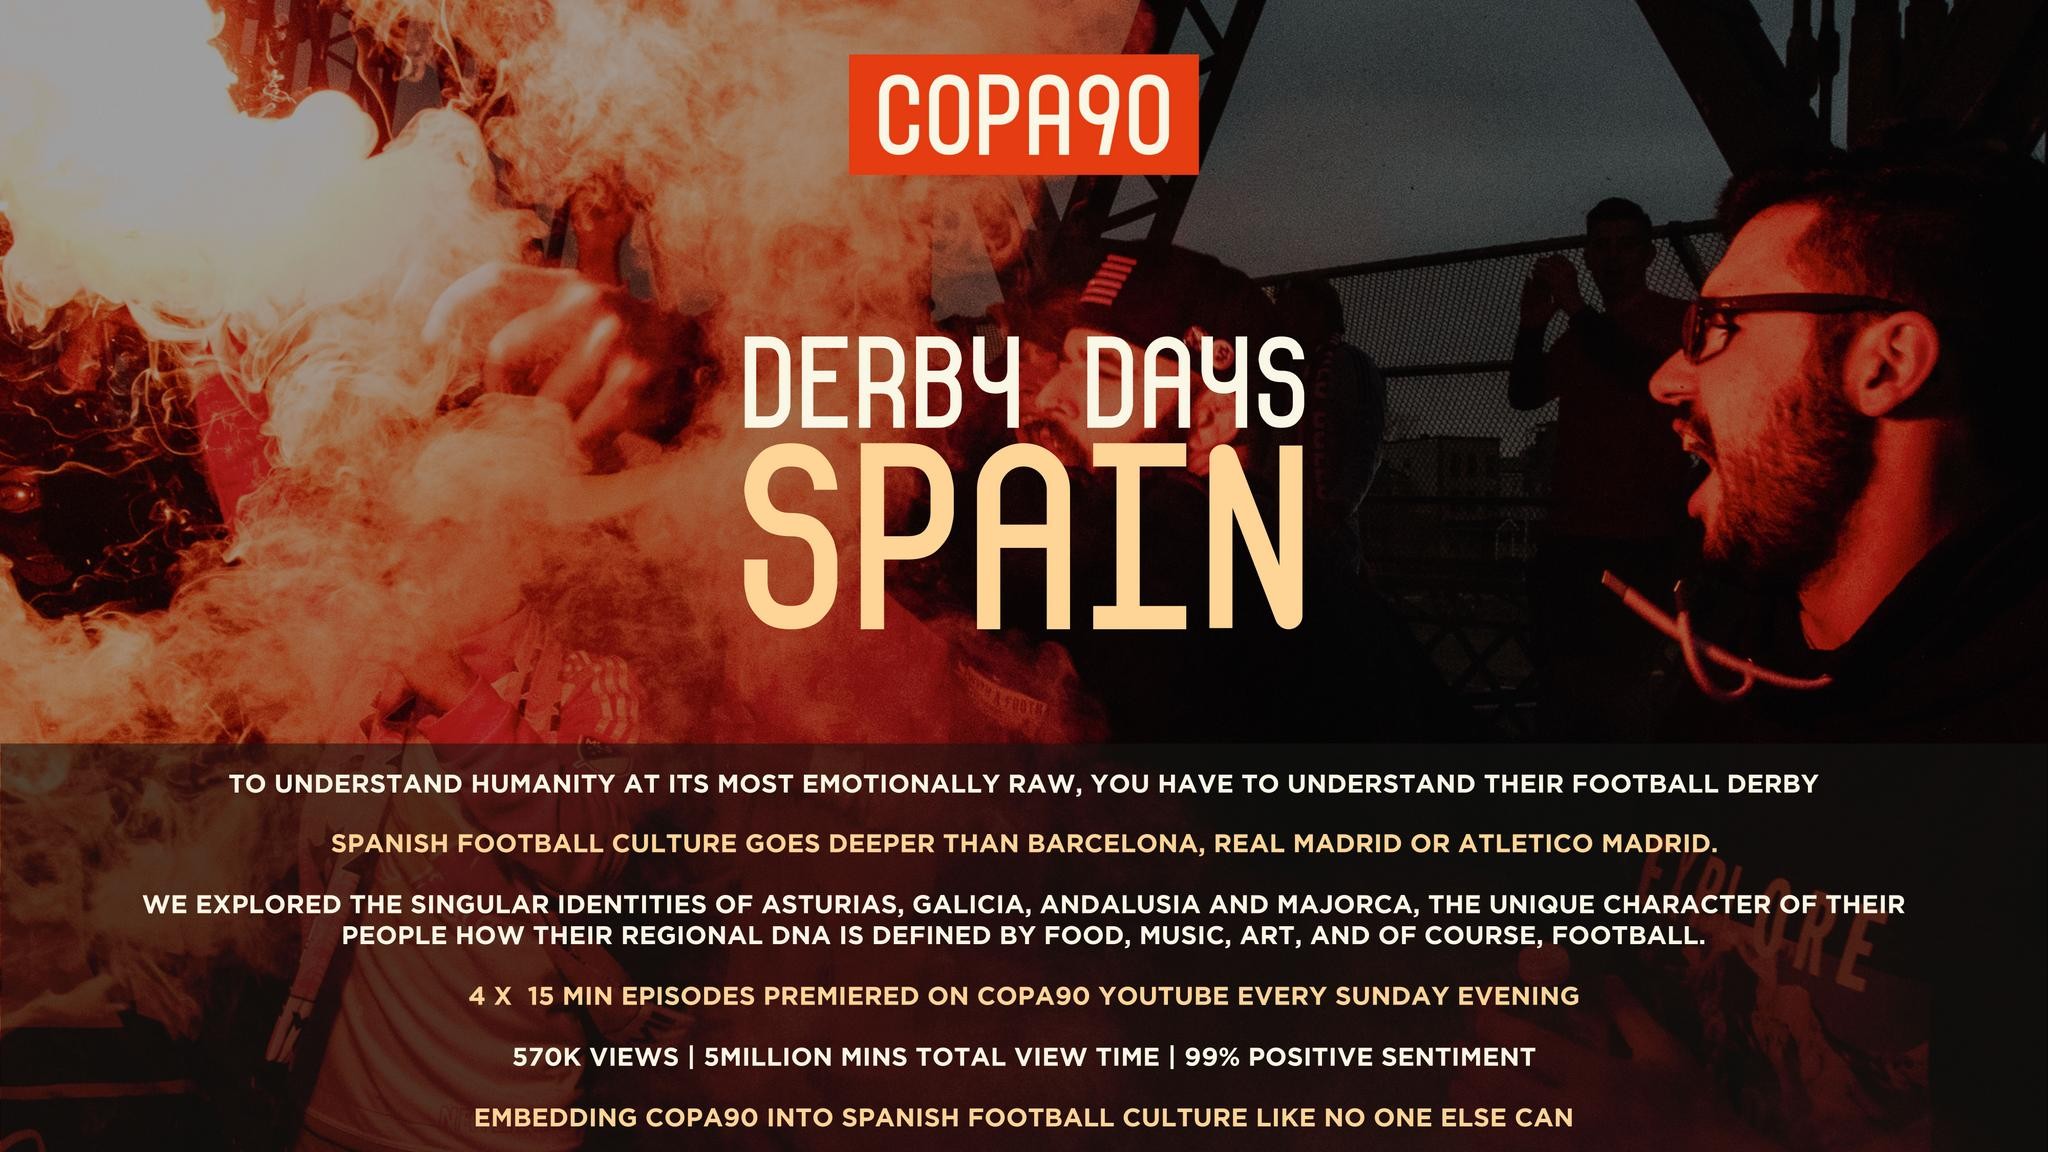 DERBY DAYS: SPANISH FOOTBALL AS YOU'VE NEVER SEEN IT BEFORE